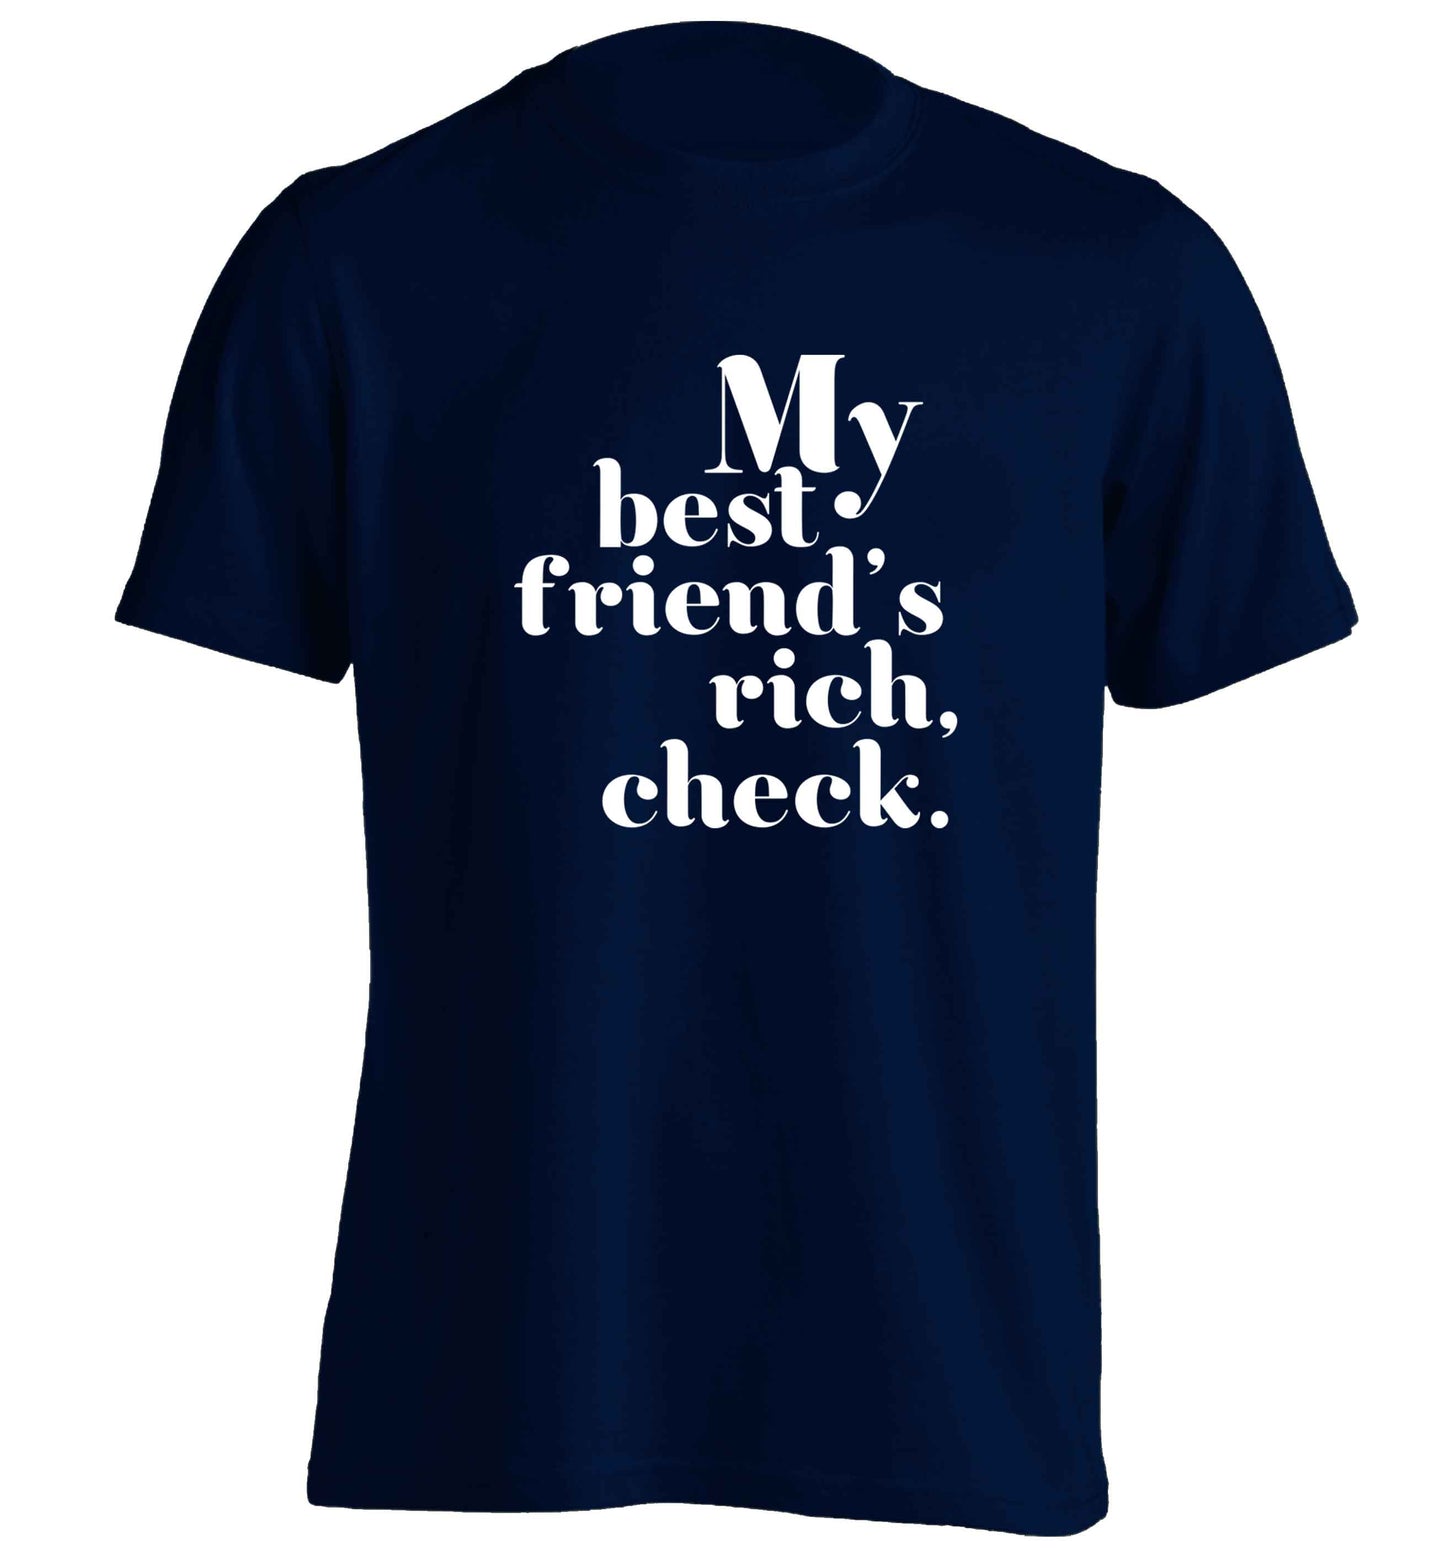 Got a rich best friend? Why not ask them to get you this, just let us  know and we'll tripple the price ;)  adults unisex navy Tshirt 2XL